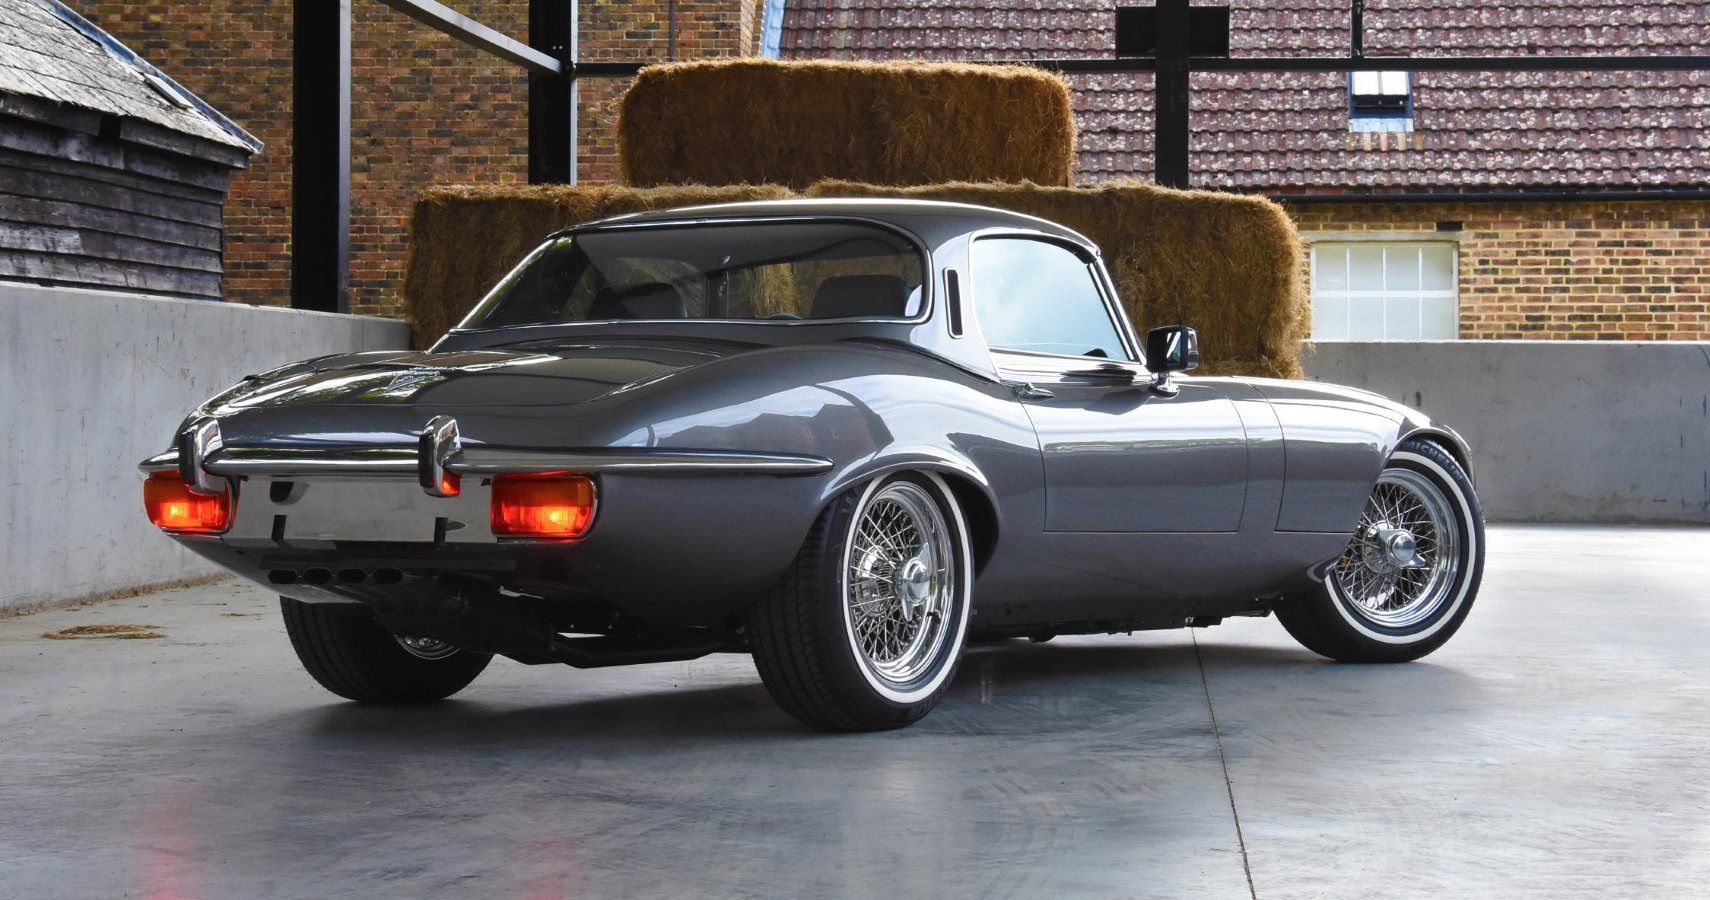 Restored 1974 Jaguar E-Type Series 3 Could Be The Highest Spec Version Of The Car Ever Made